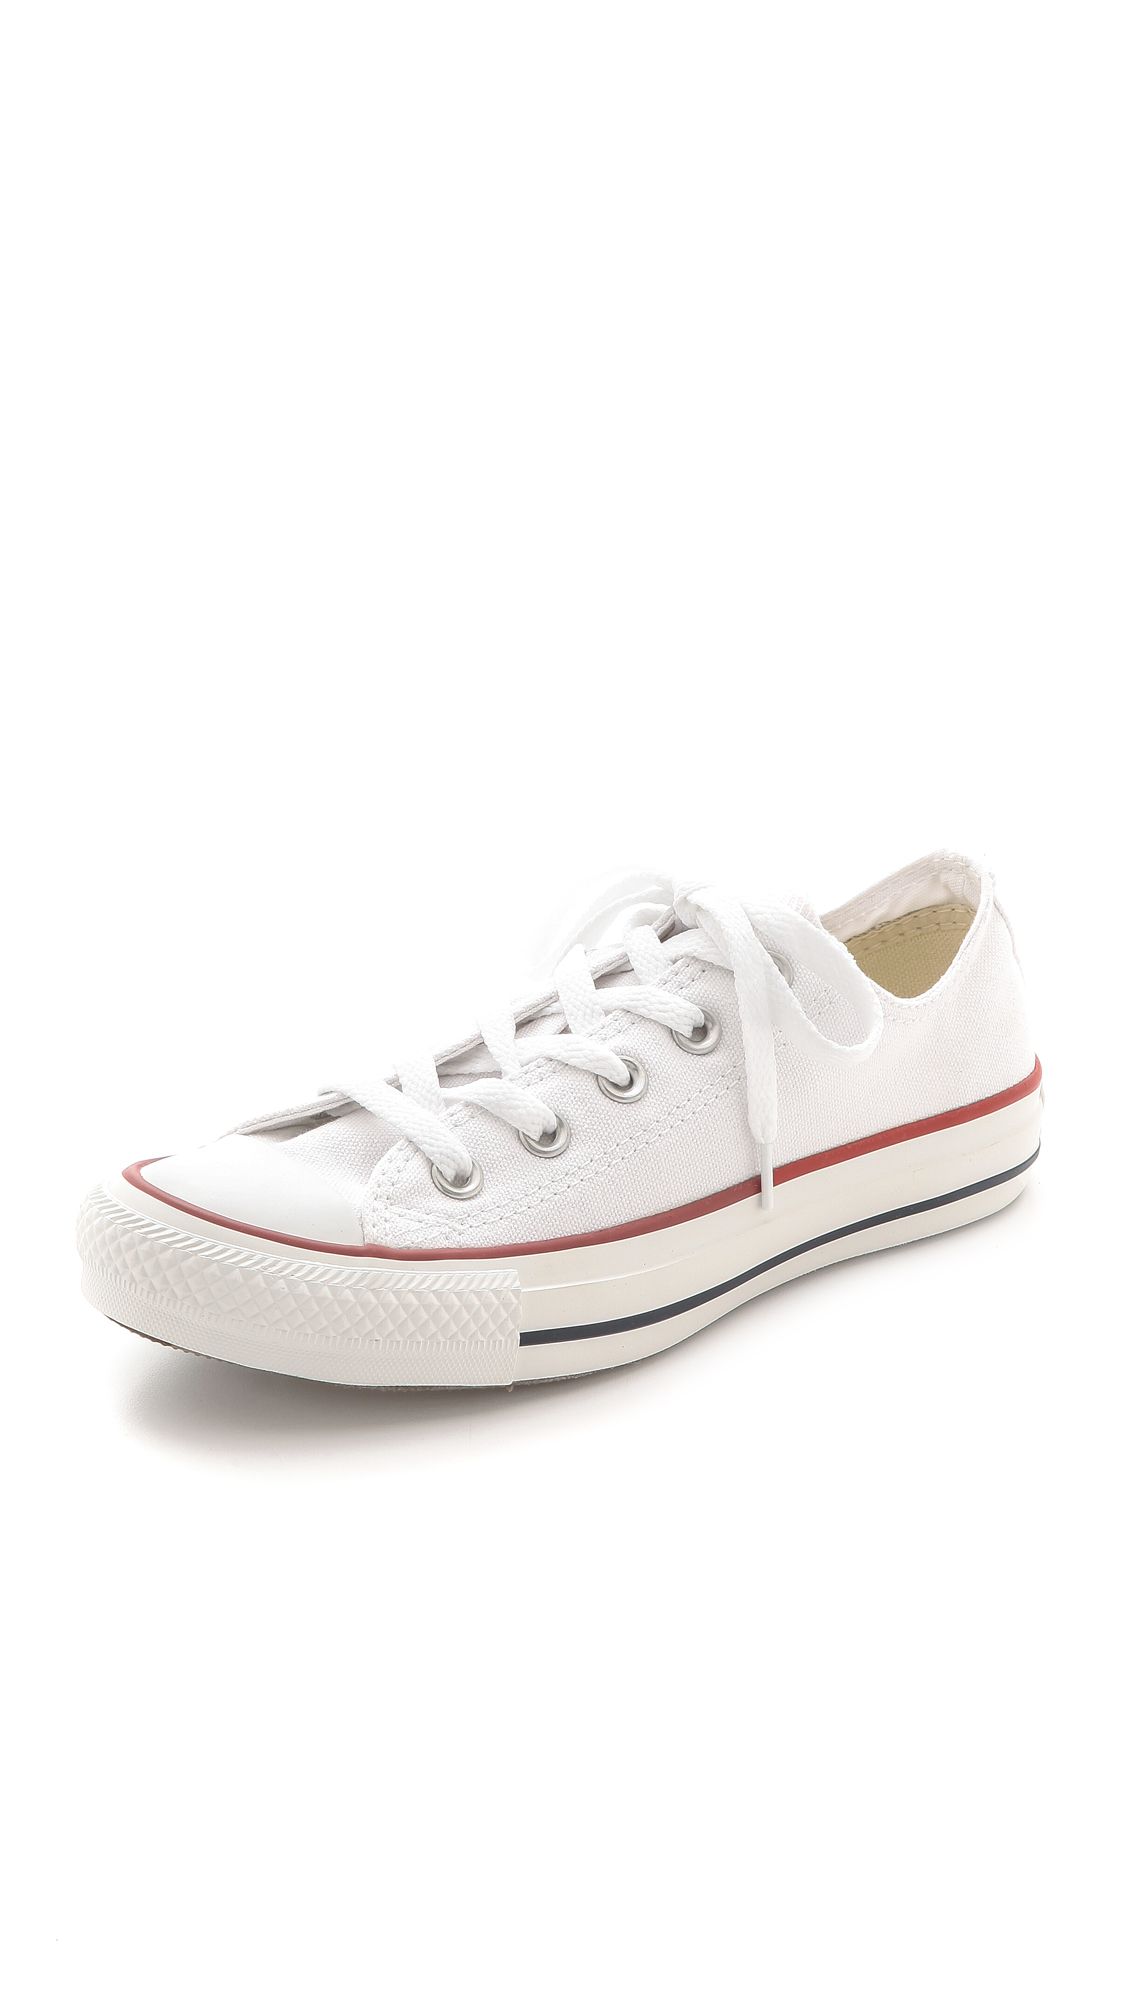 Chuck Taylor All Star Sneakers | Shopbop